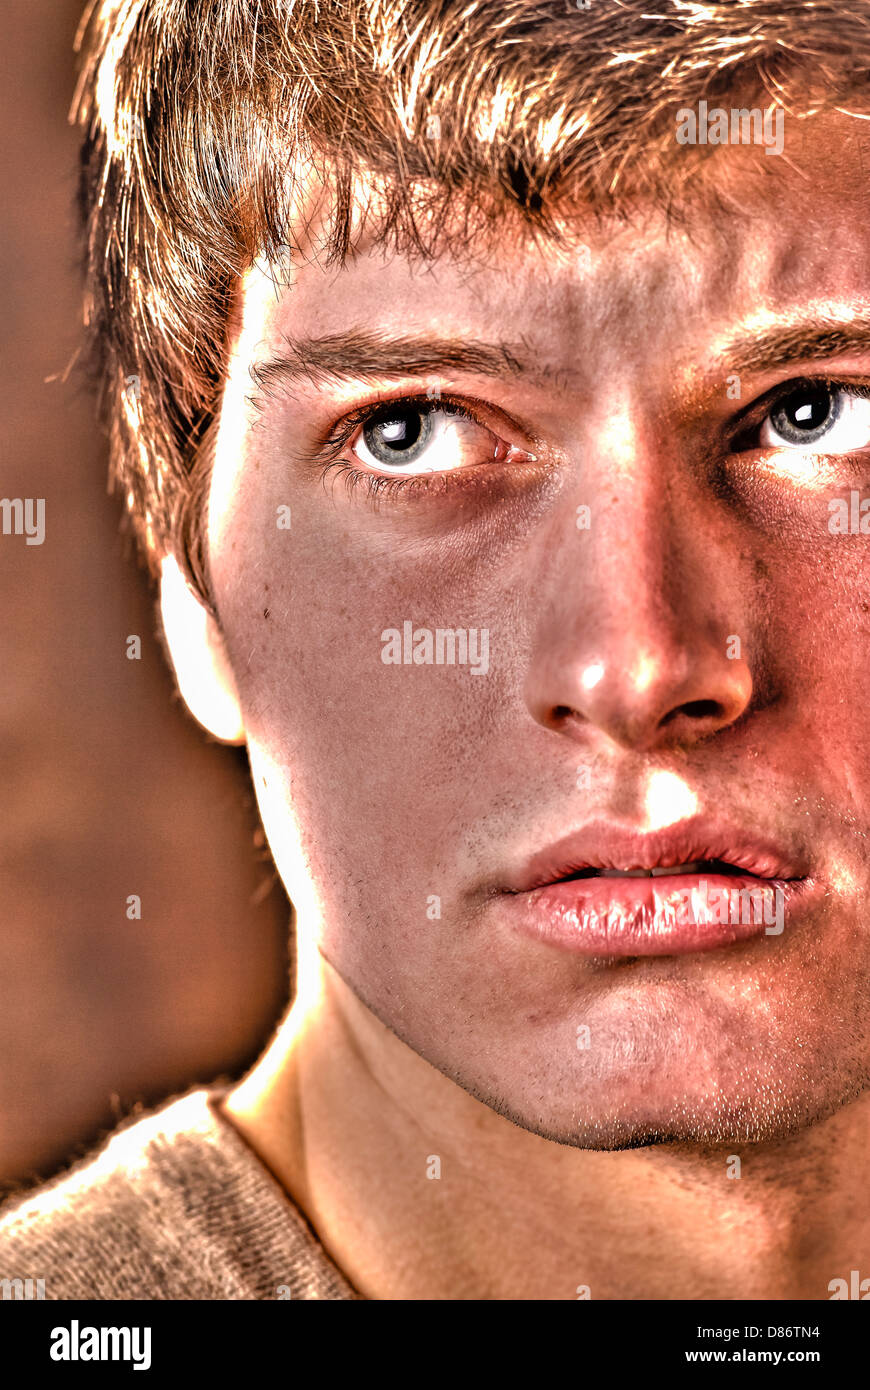 Teen male somewhat sad or depressed in a studio environment. Stock Photo